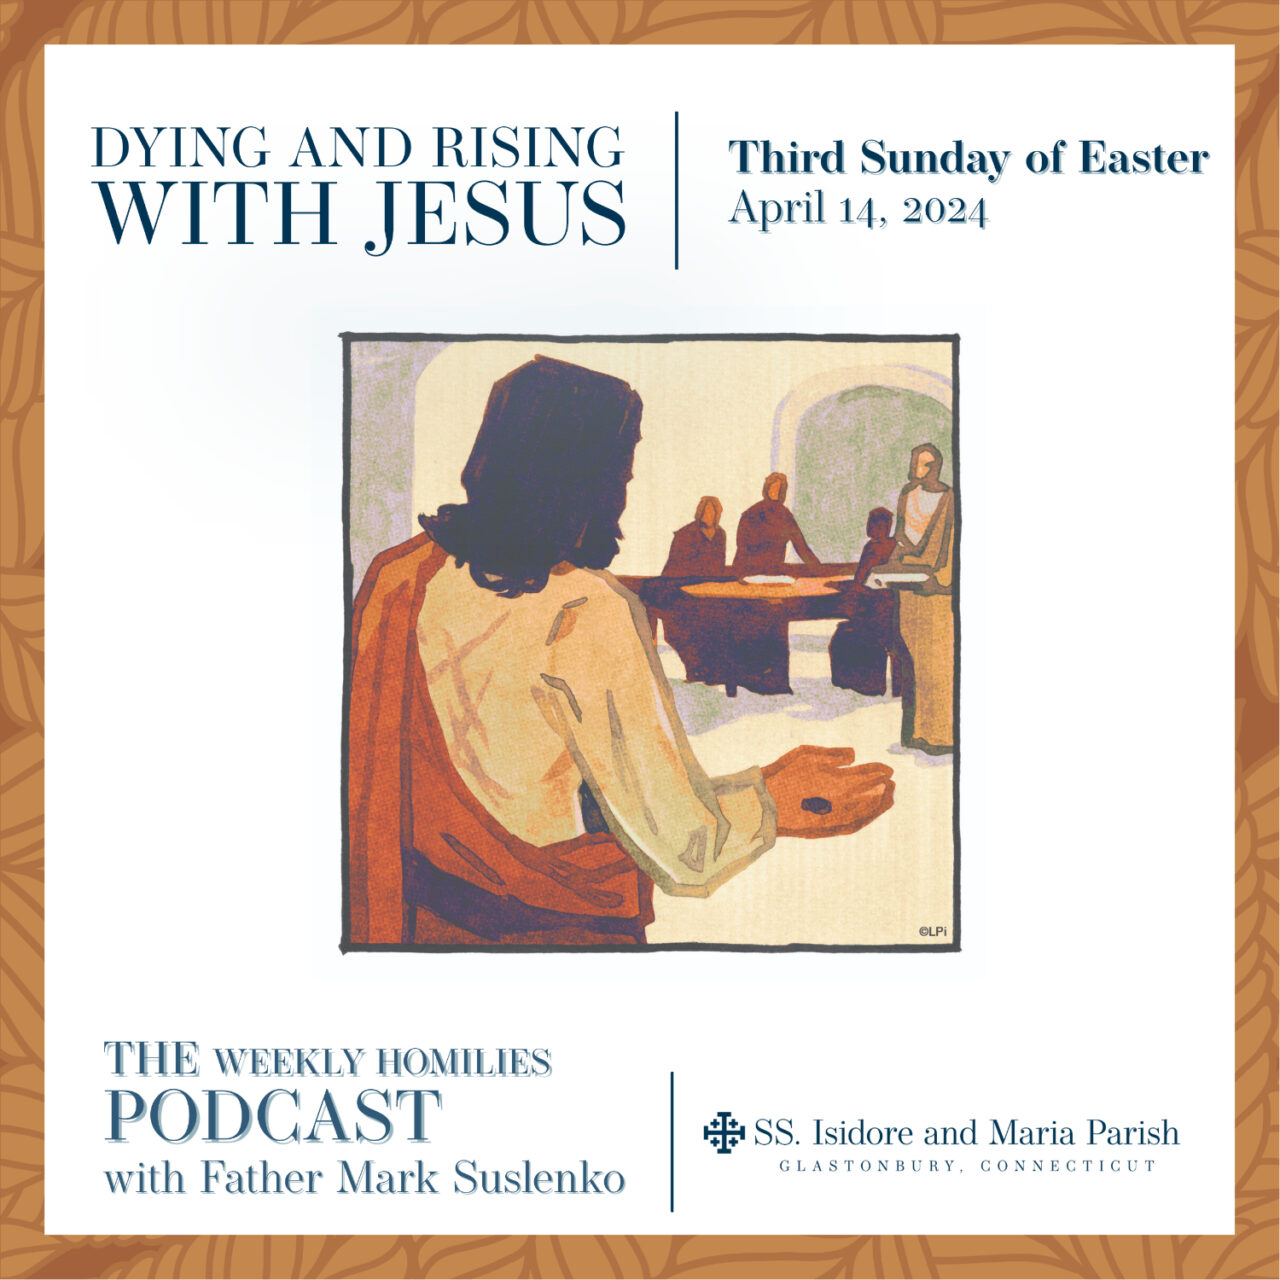 PODCAST: Dying and Rising with Jesus